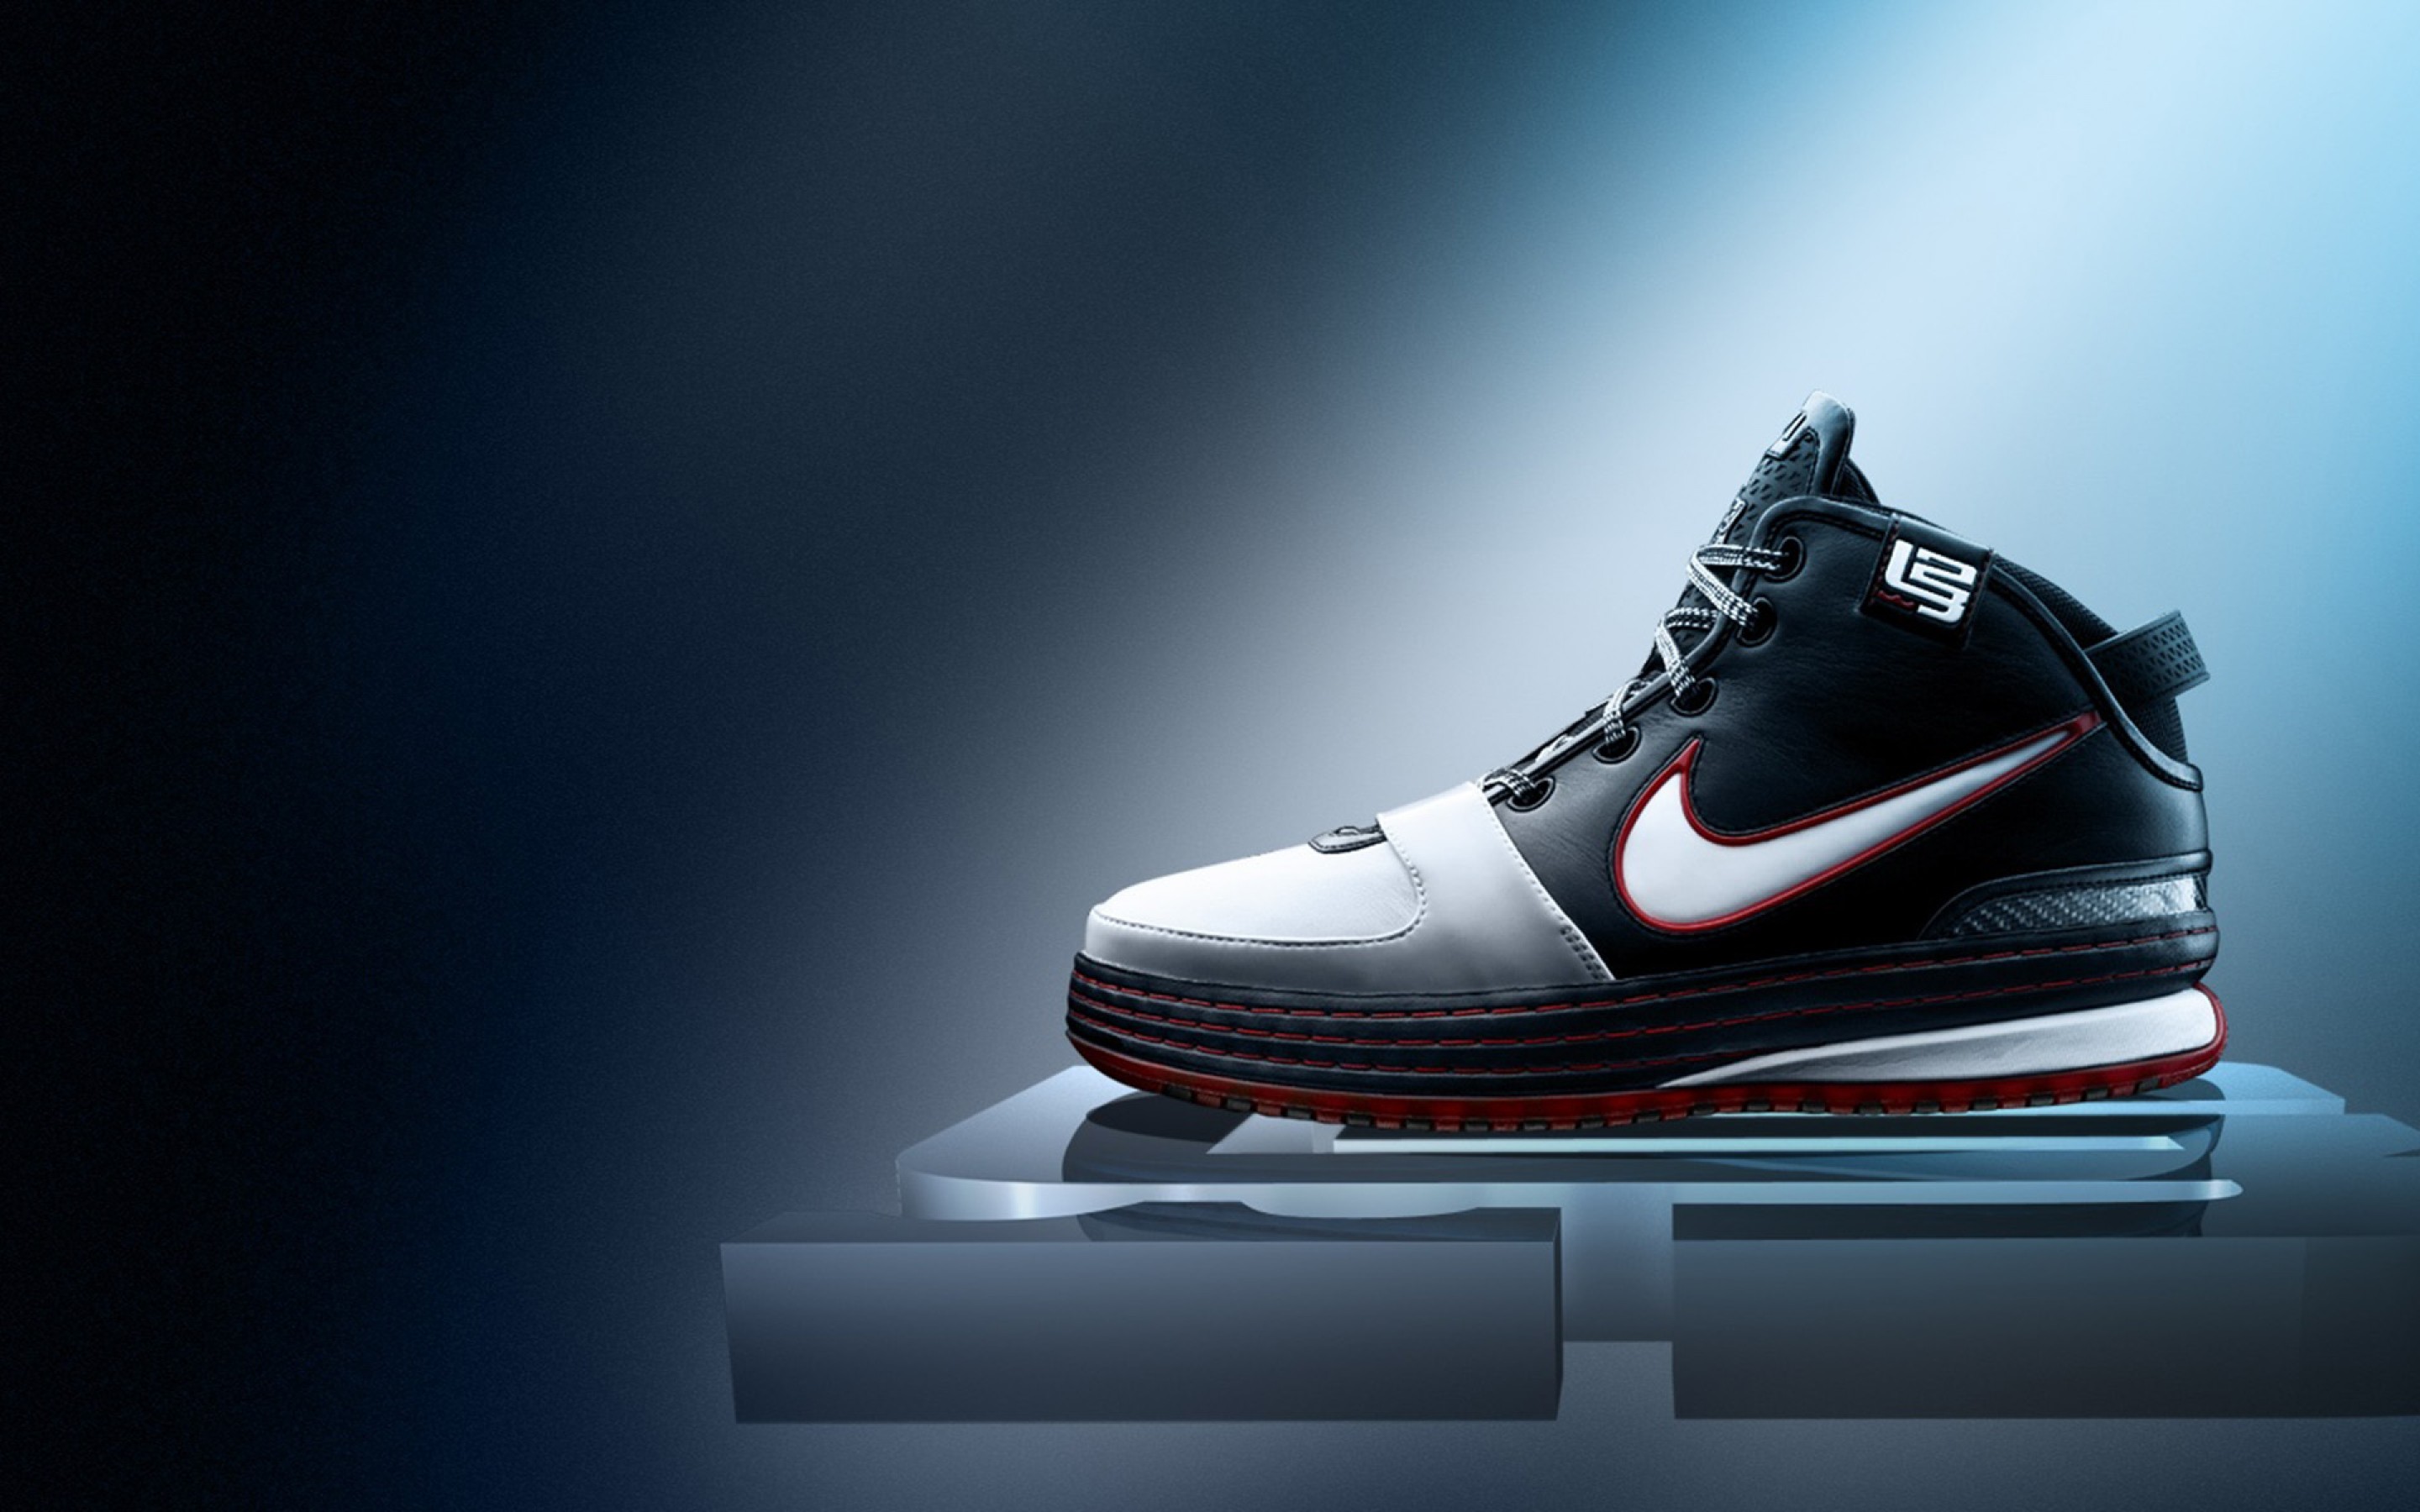 Free Nike Basketball Sneakers HD Wallpapers [2880x1800] for your Desktop, Mobile & Tablet | Explore 48+ HD Sneaker Wallpapers | HD Sneaker Wallpaper, Wallpaper